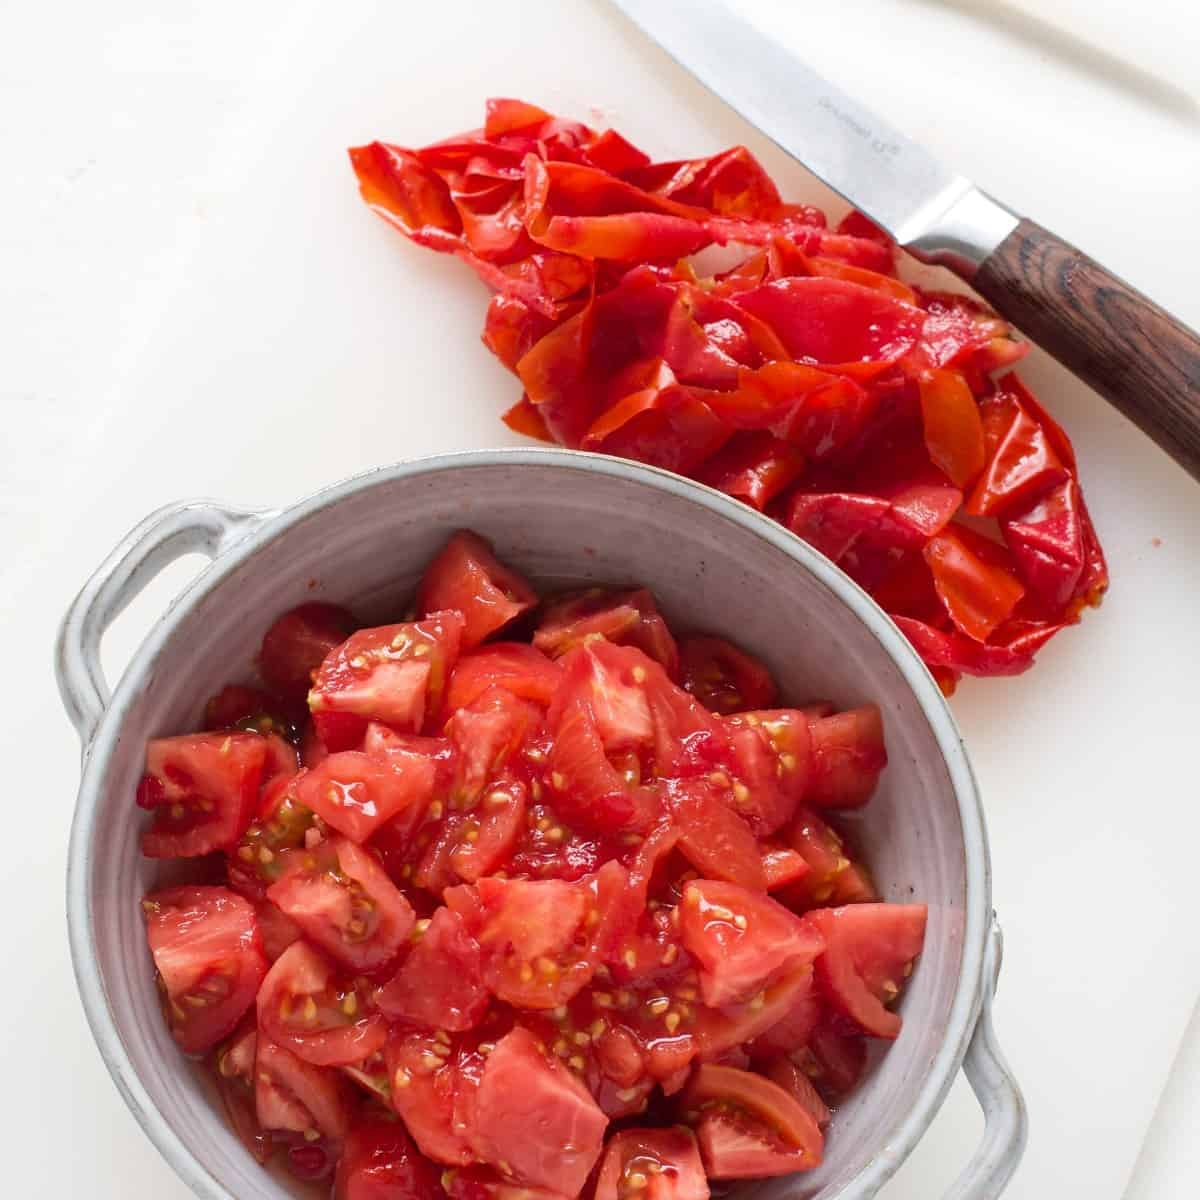 Peeled and chopped tomatoes in a bowl.